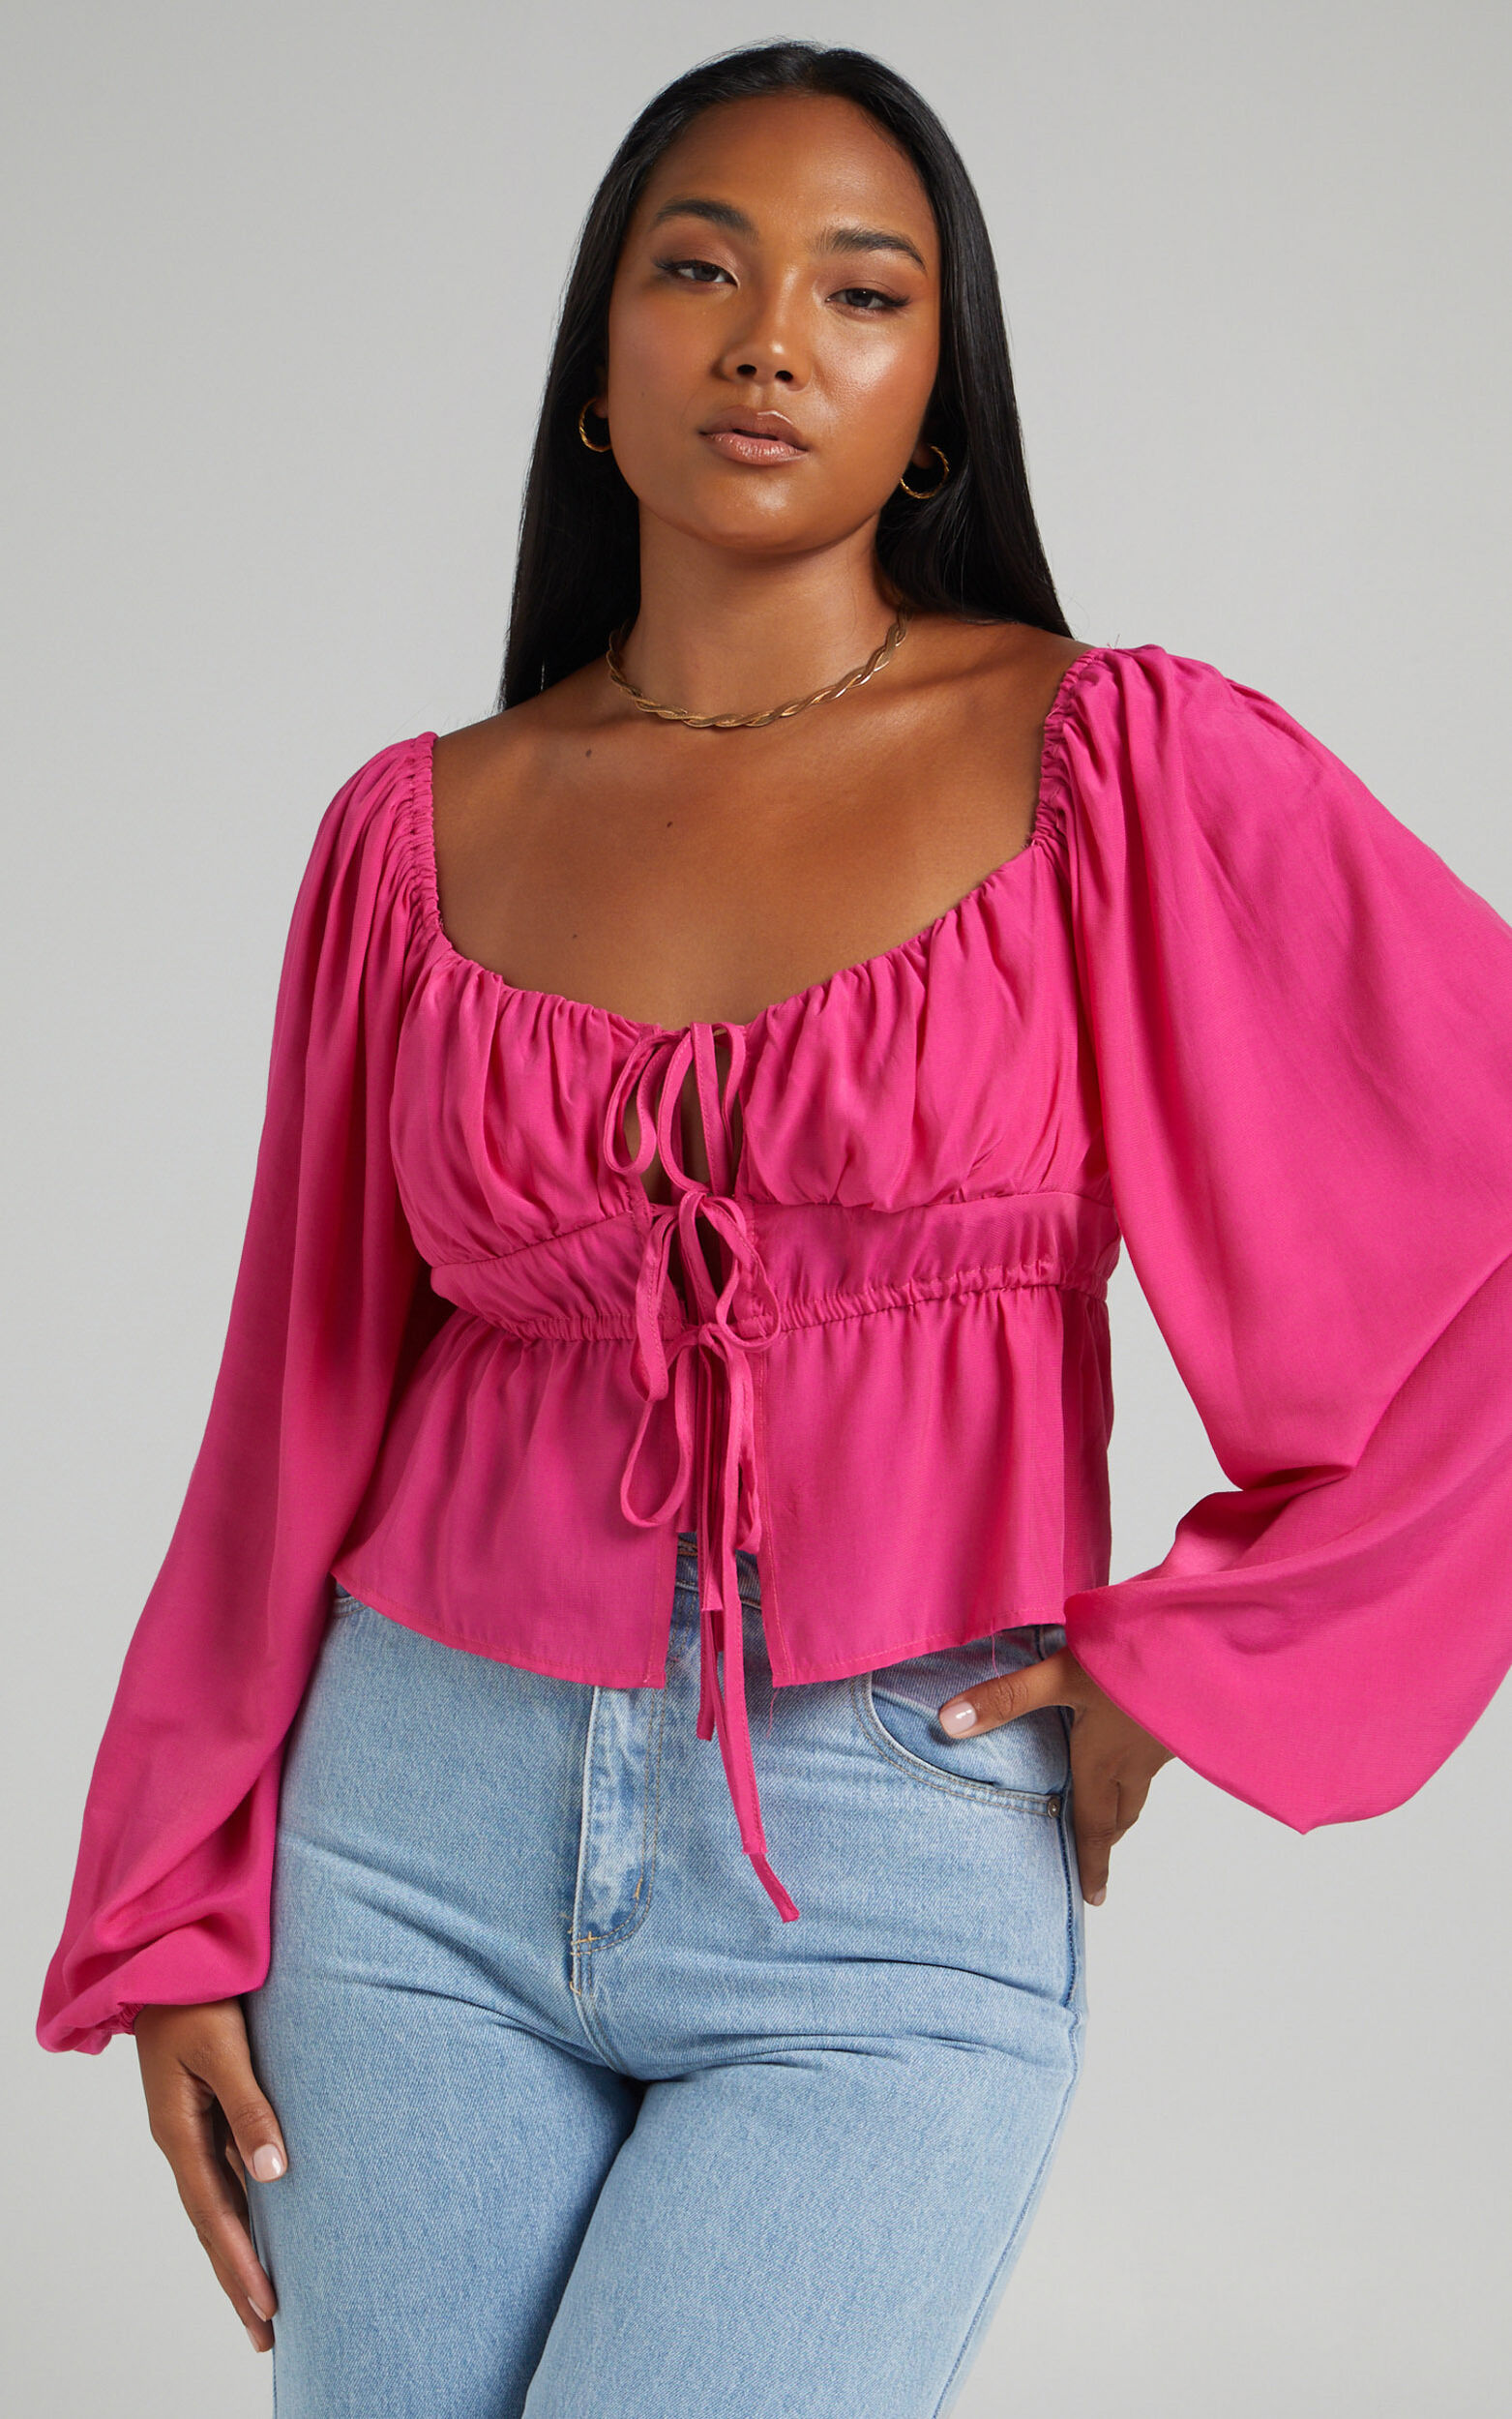 Nadine Top - Long Sleeve Ruched Bust Top in Hot Pink - 06, PNK2